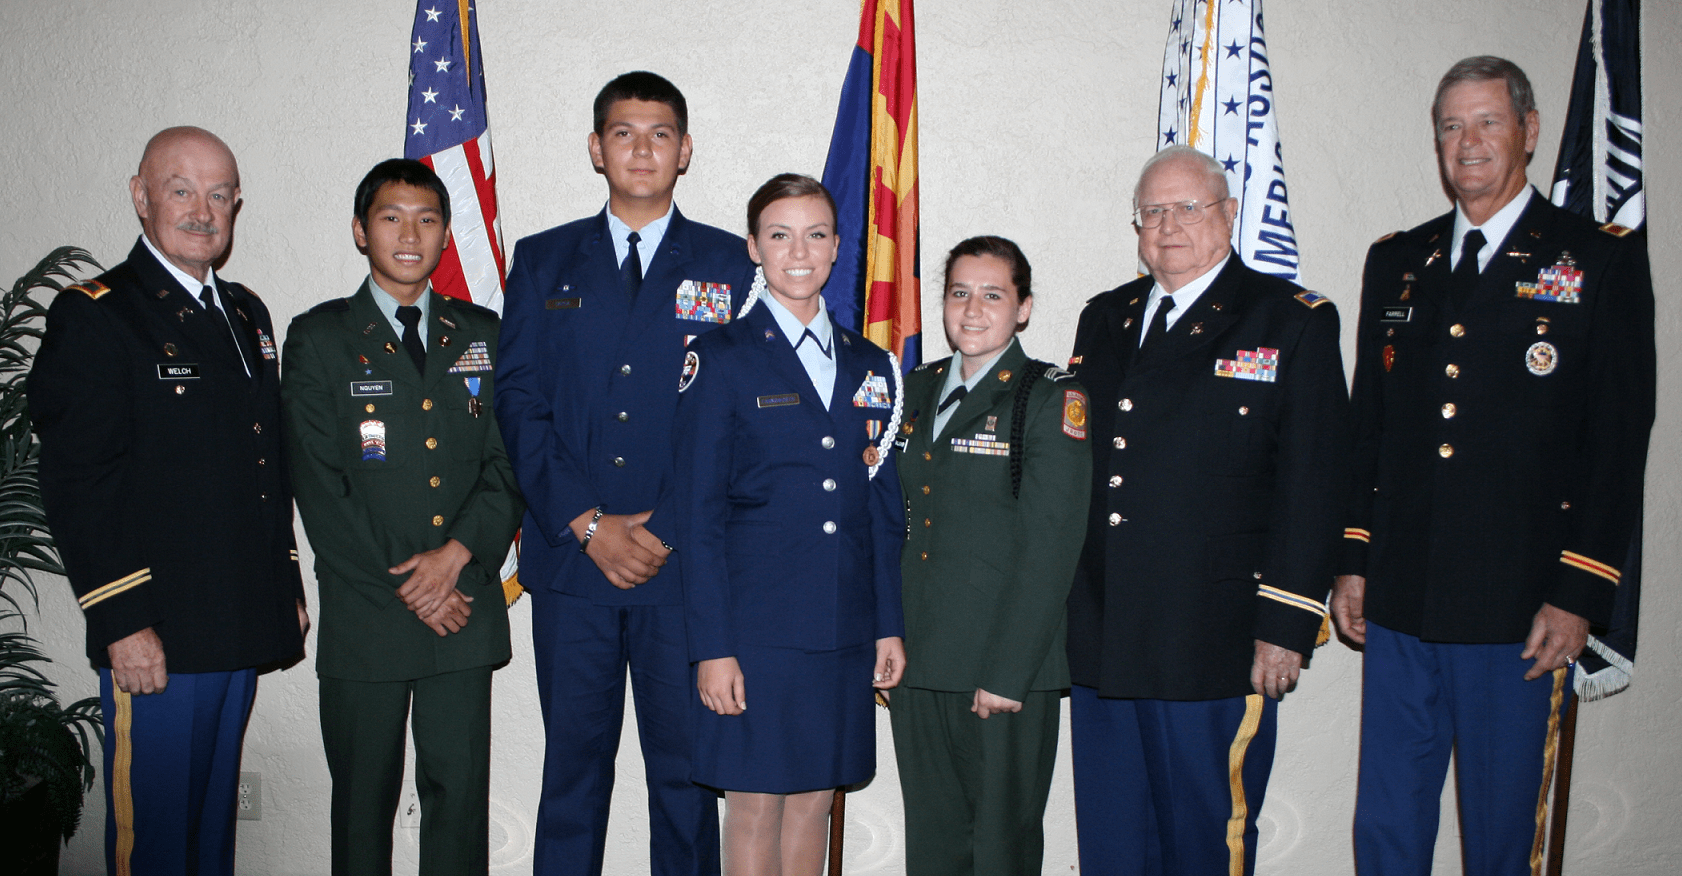 2013 Scholarship Awardees, left to right: Chapter President Colonel Rob Welch, Central HS Cadet Vu Nguyen, Sandra Day O'Connor HS Cadets Luis Garcia & Alexis Farnsworth, North HS Cadet Shelby Gallagher, Scholarship Treasurer Colonel Bill Roscher, and Scholarship Committee member Colonel Rance Farrell.